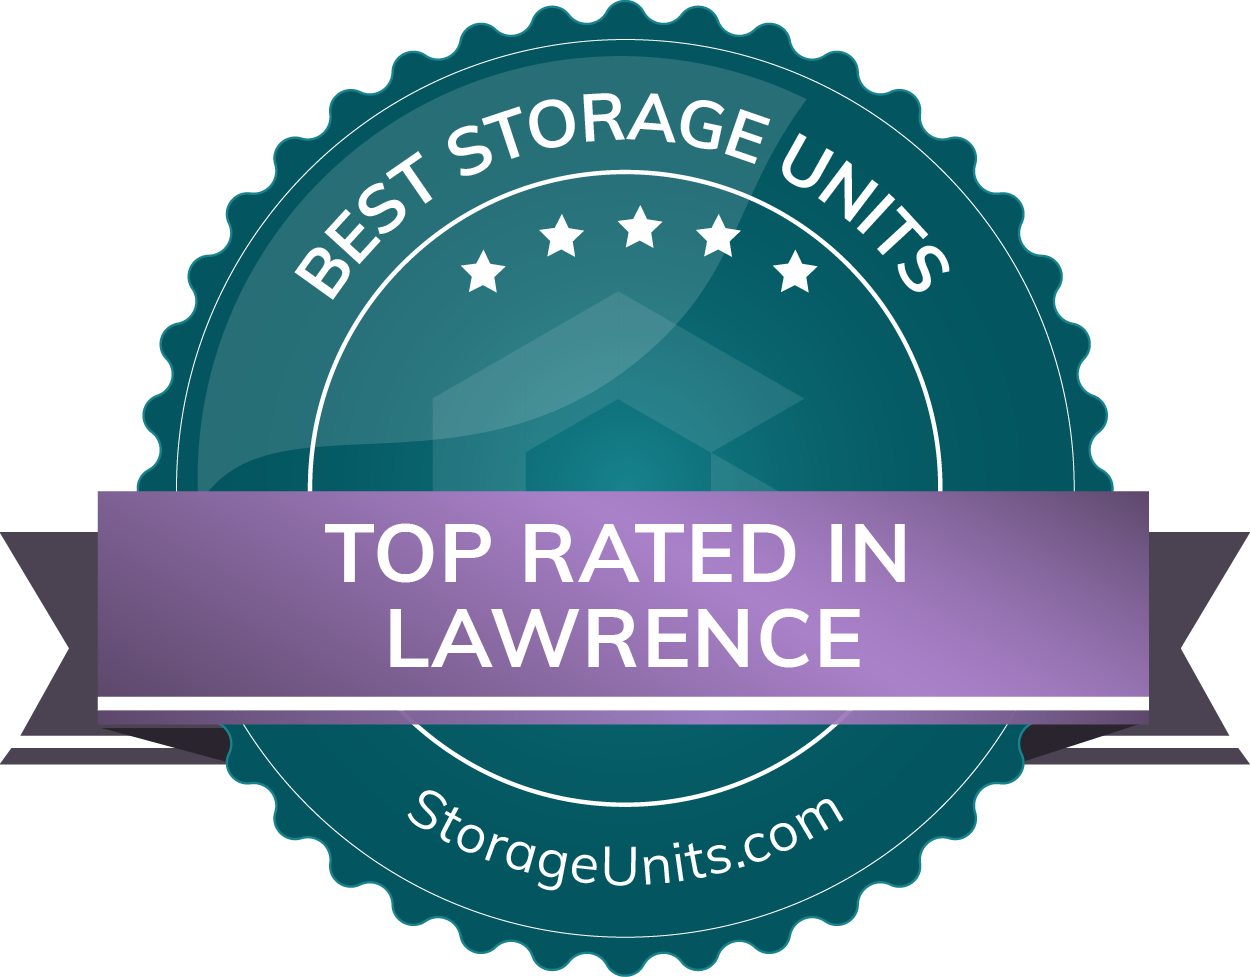 Best storage units top rated in Lawrence.